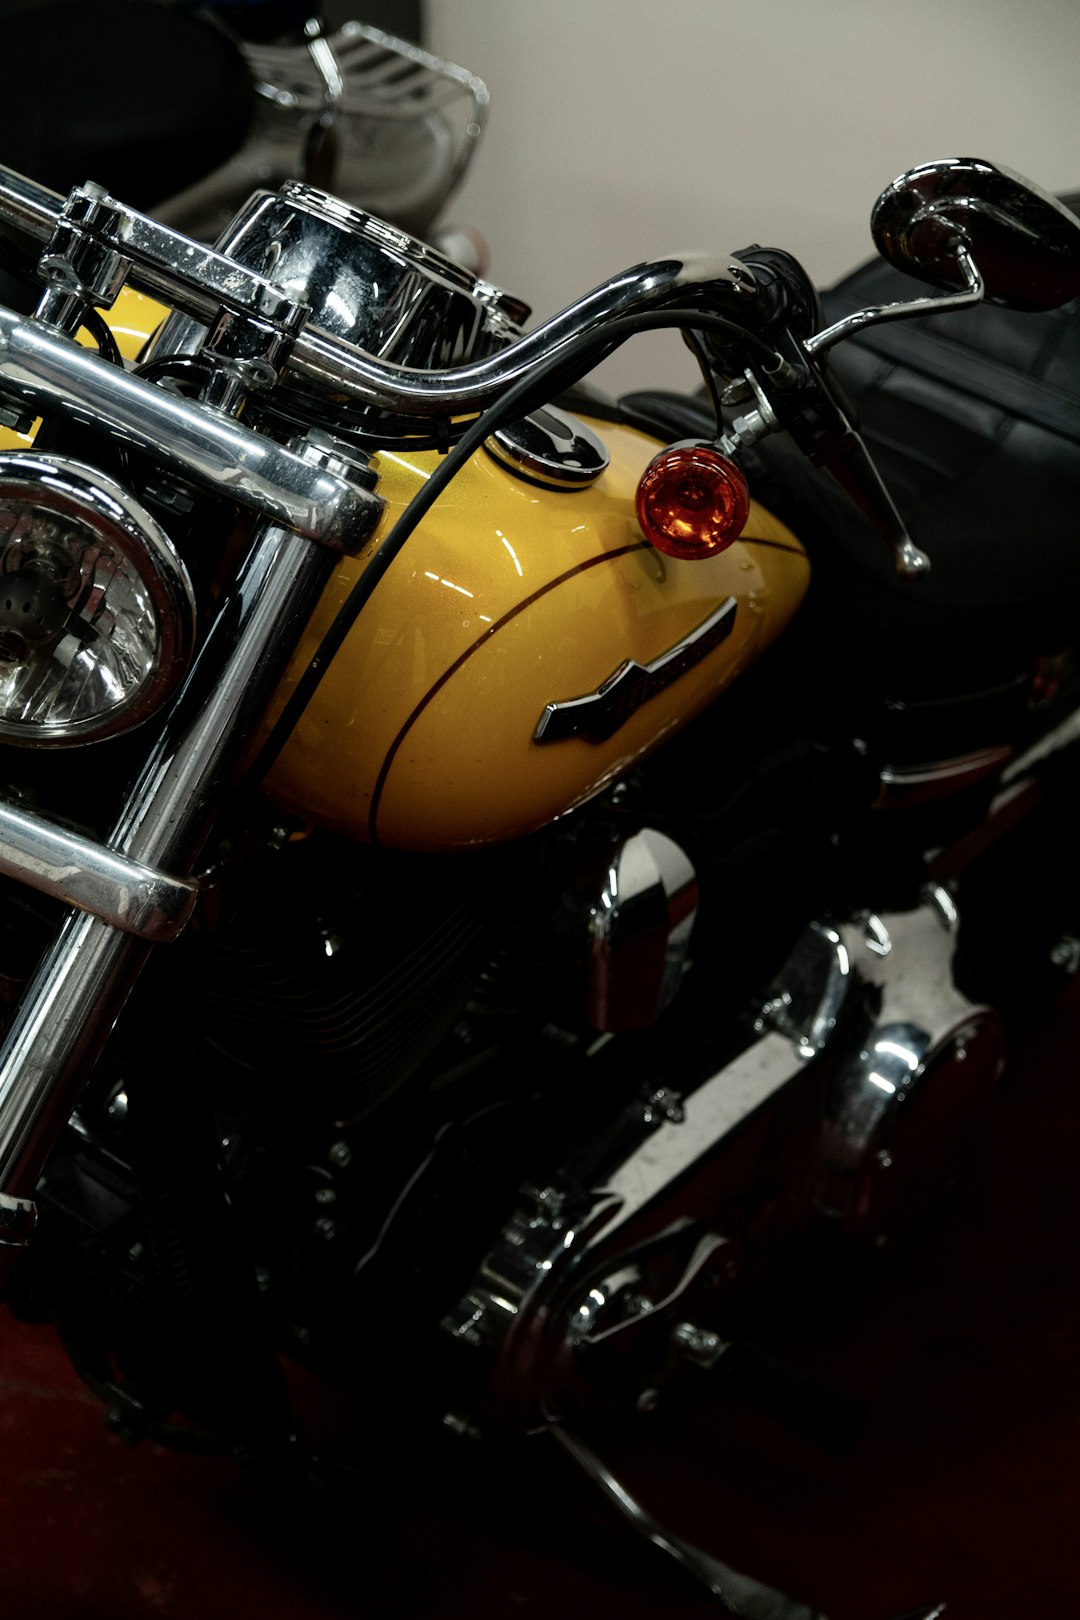 yellow and black motorcycle